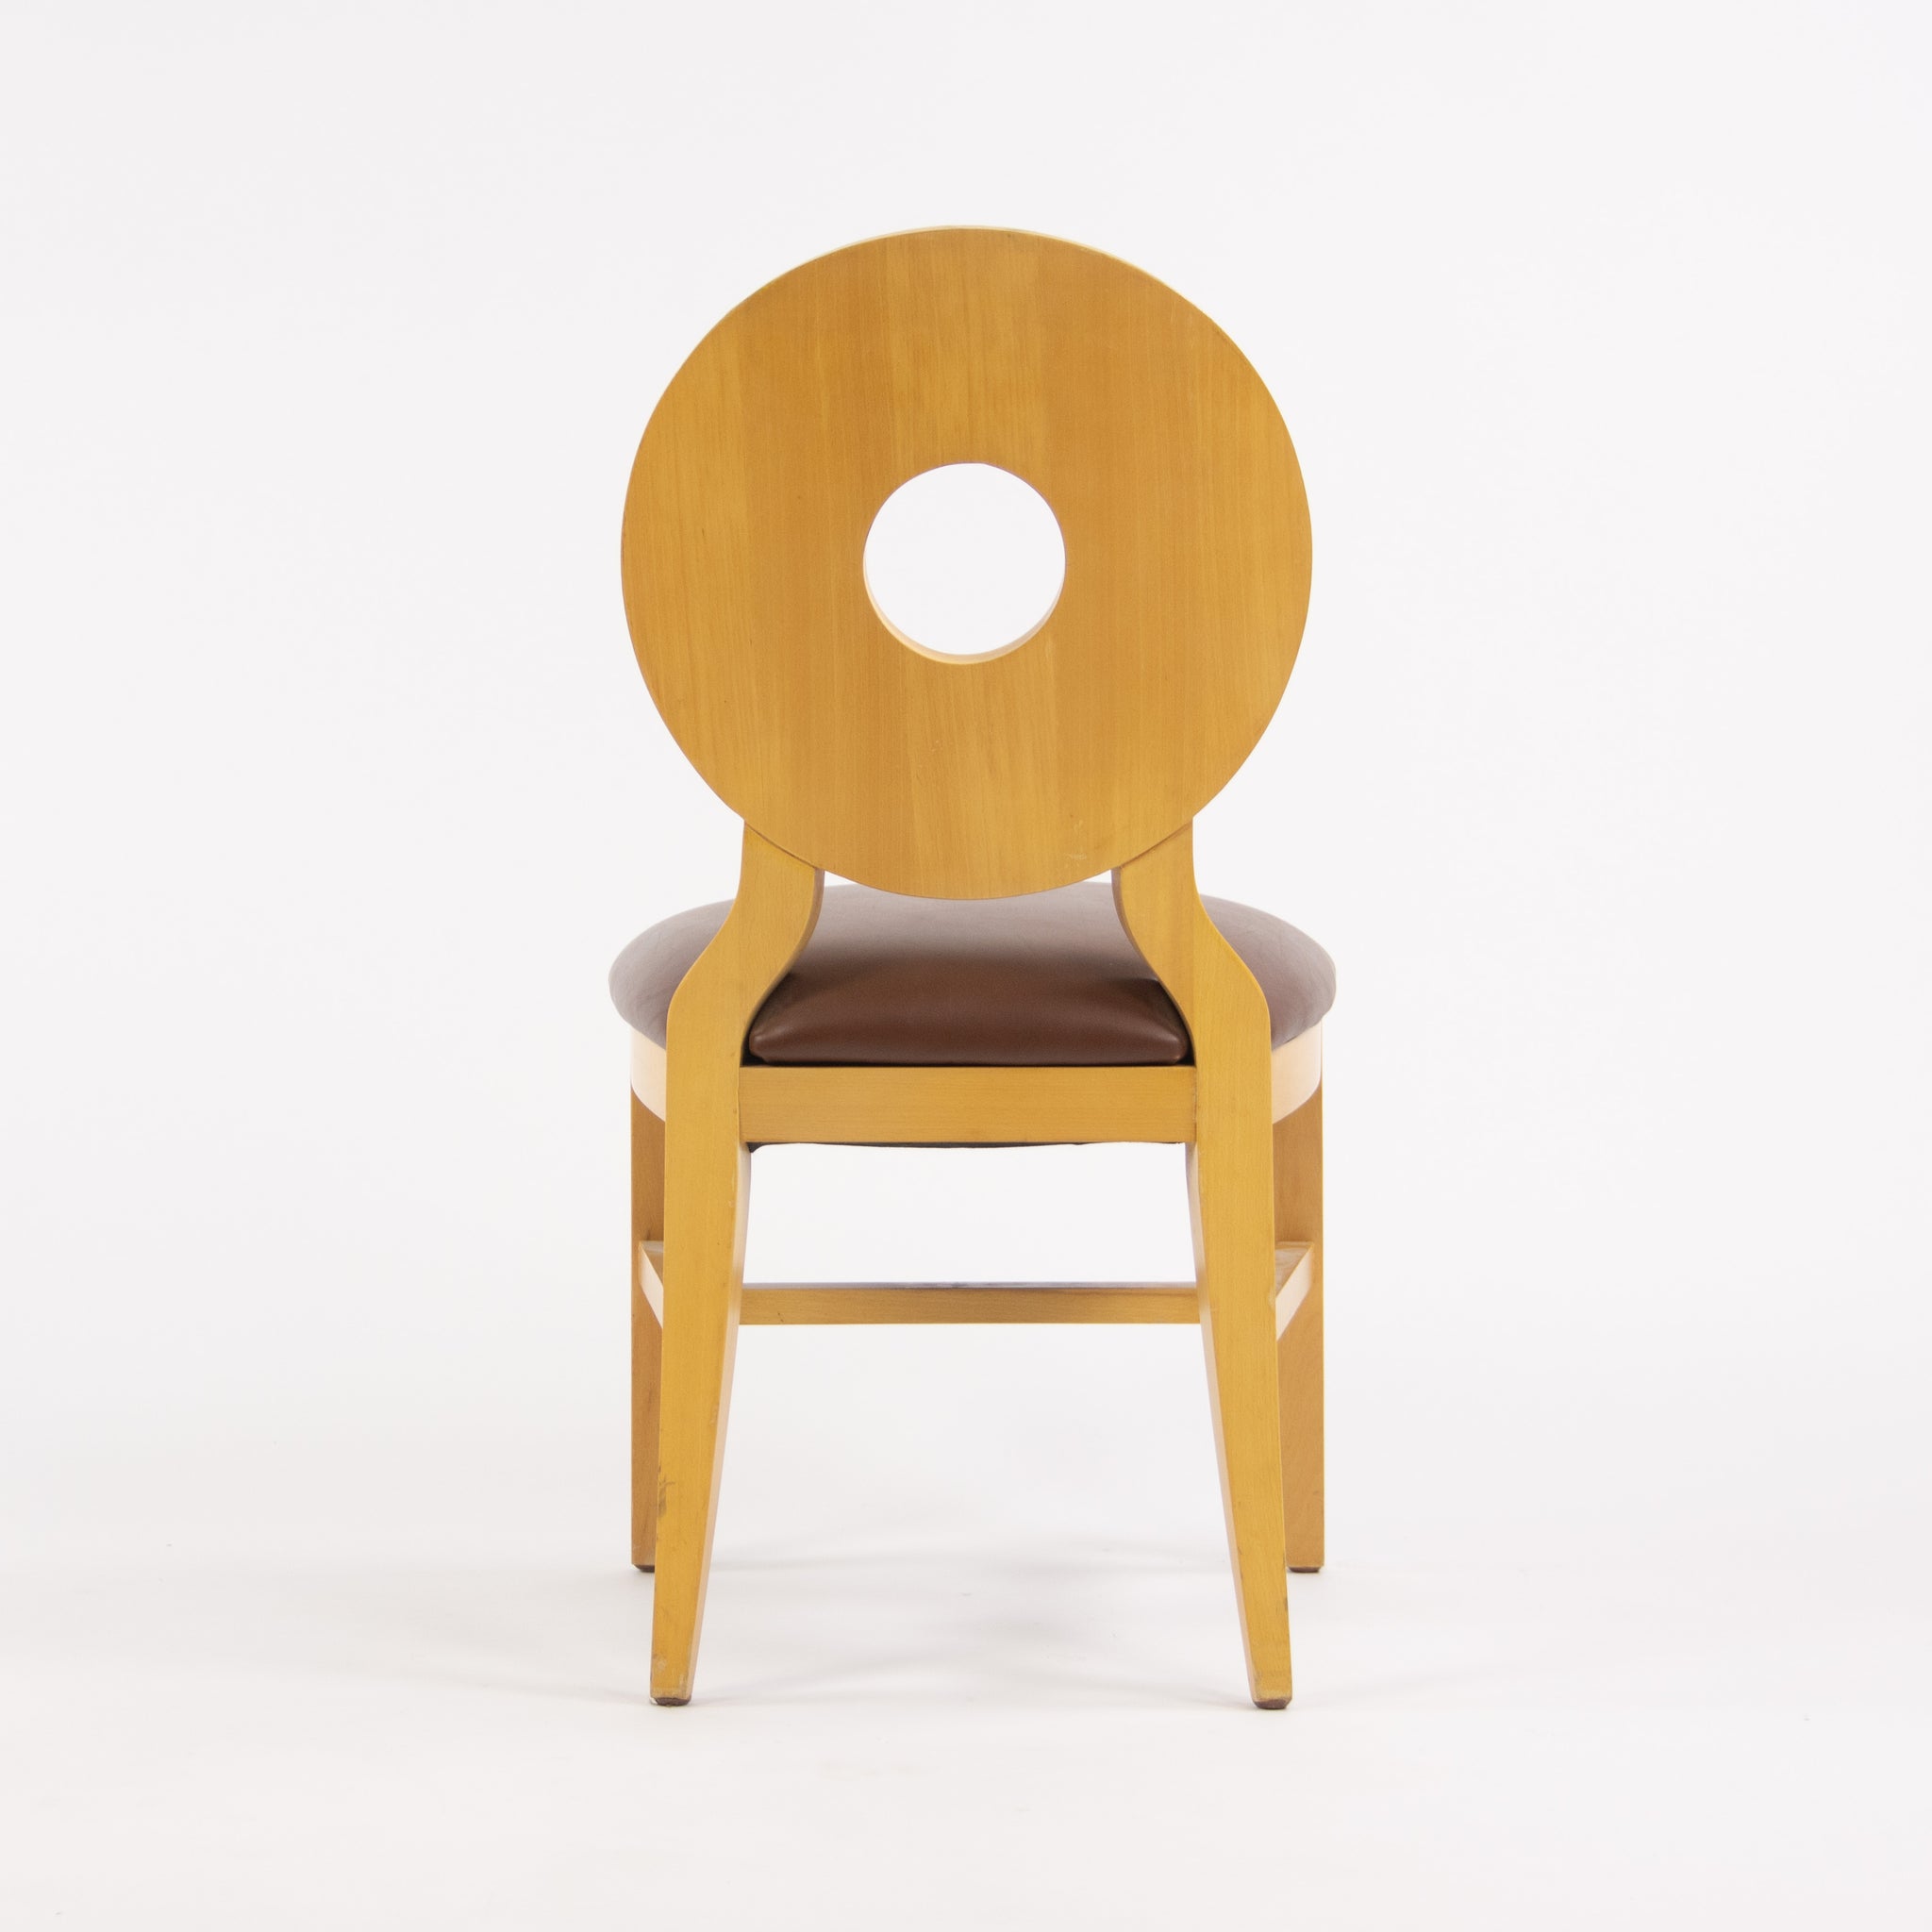 SOLD Michael Graves Postmodern Maple Upholstered Dining Side Chair